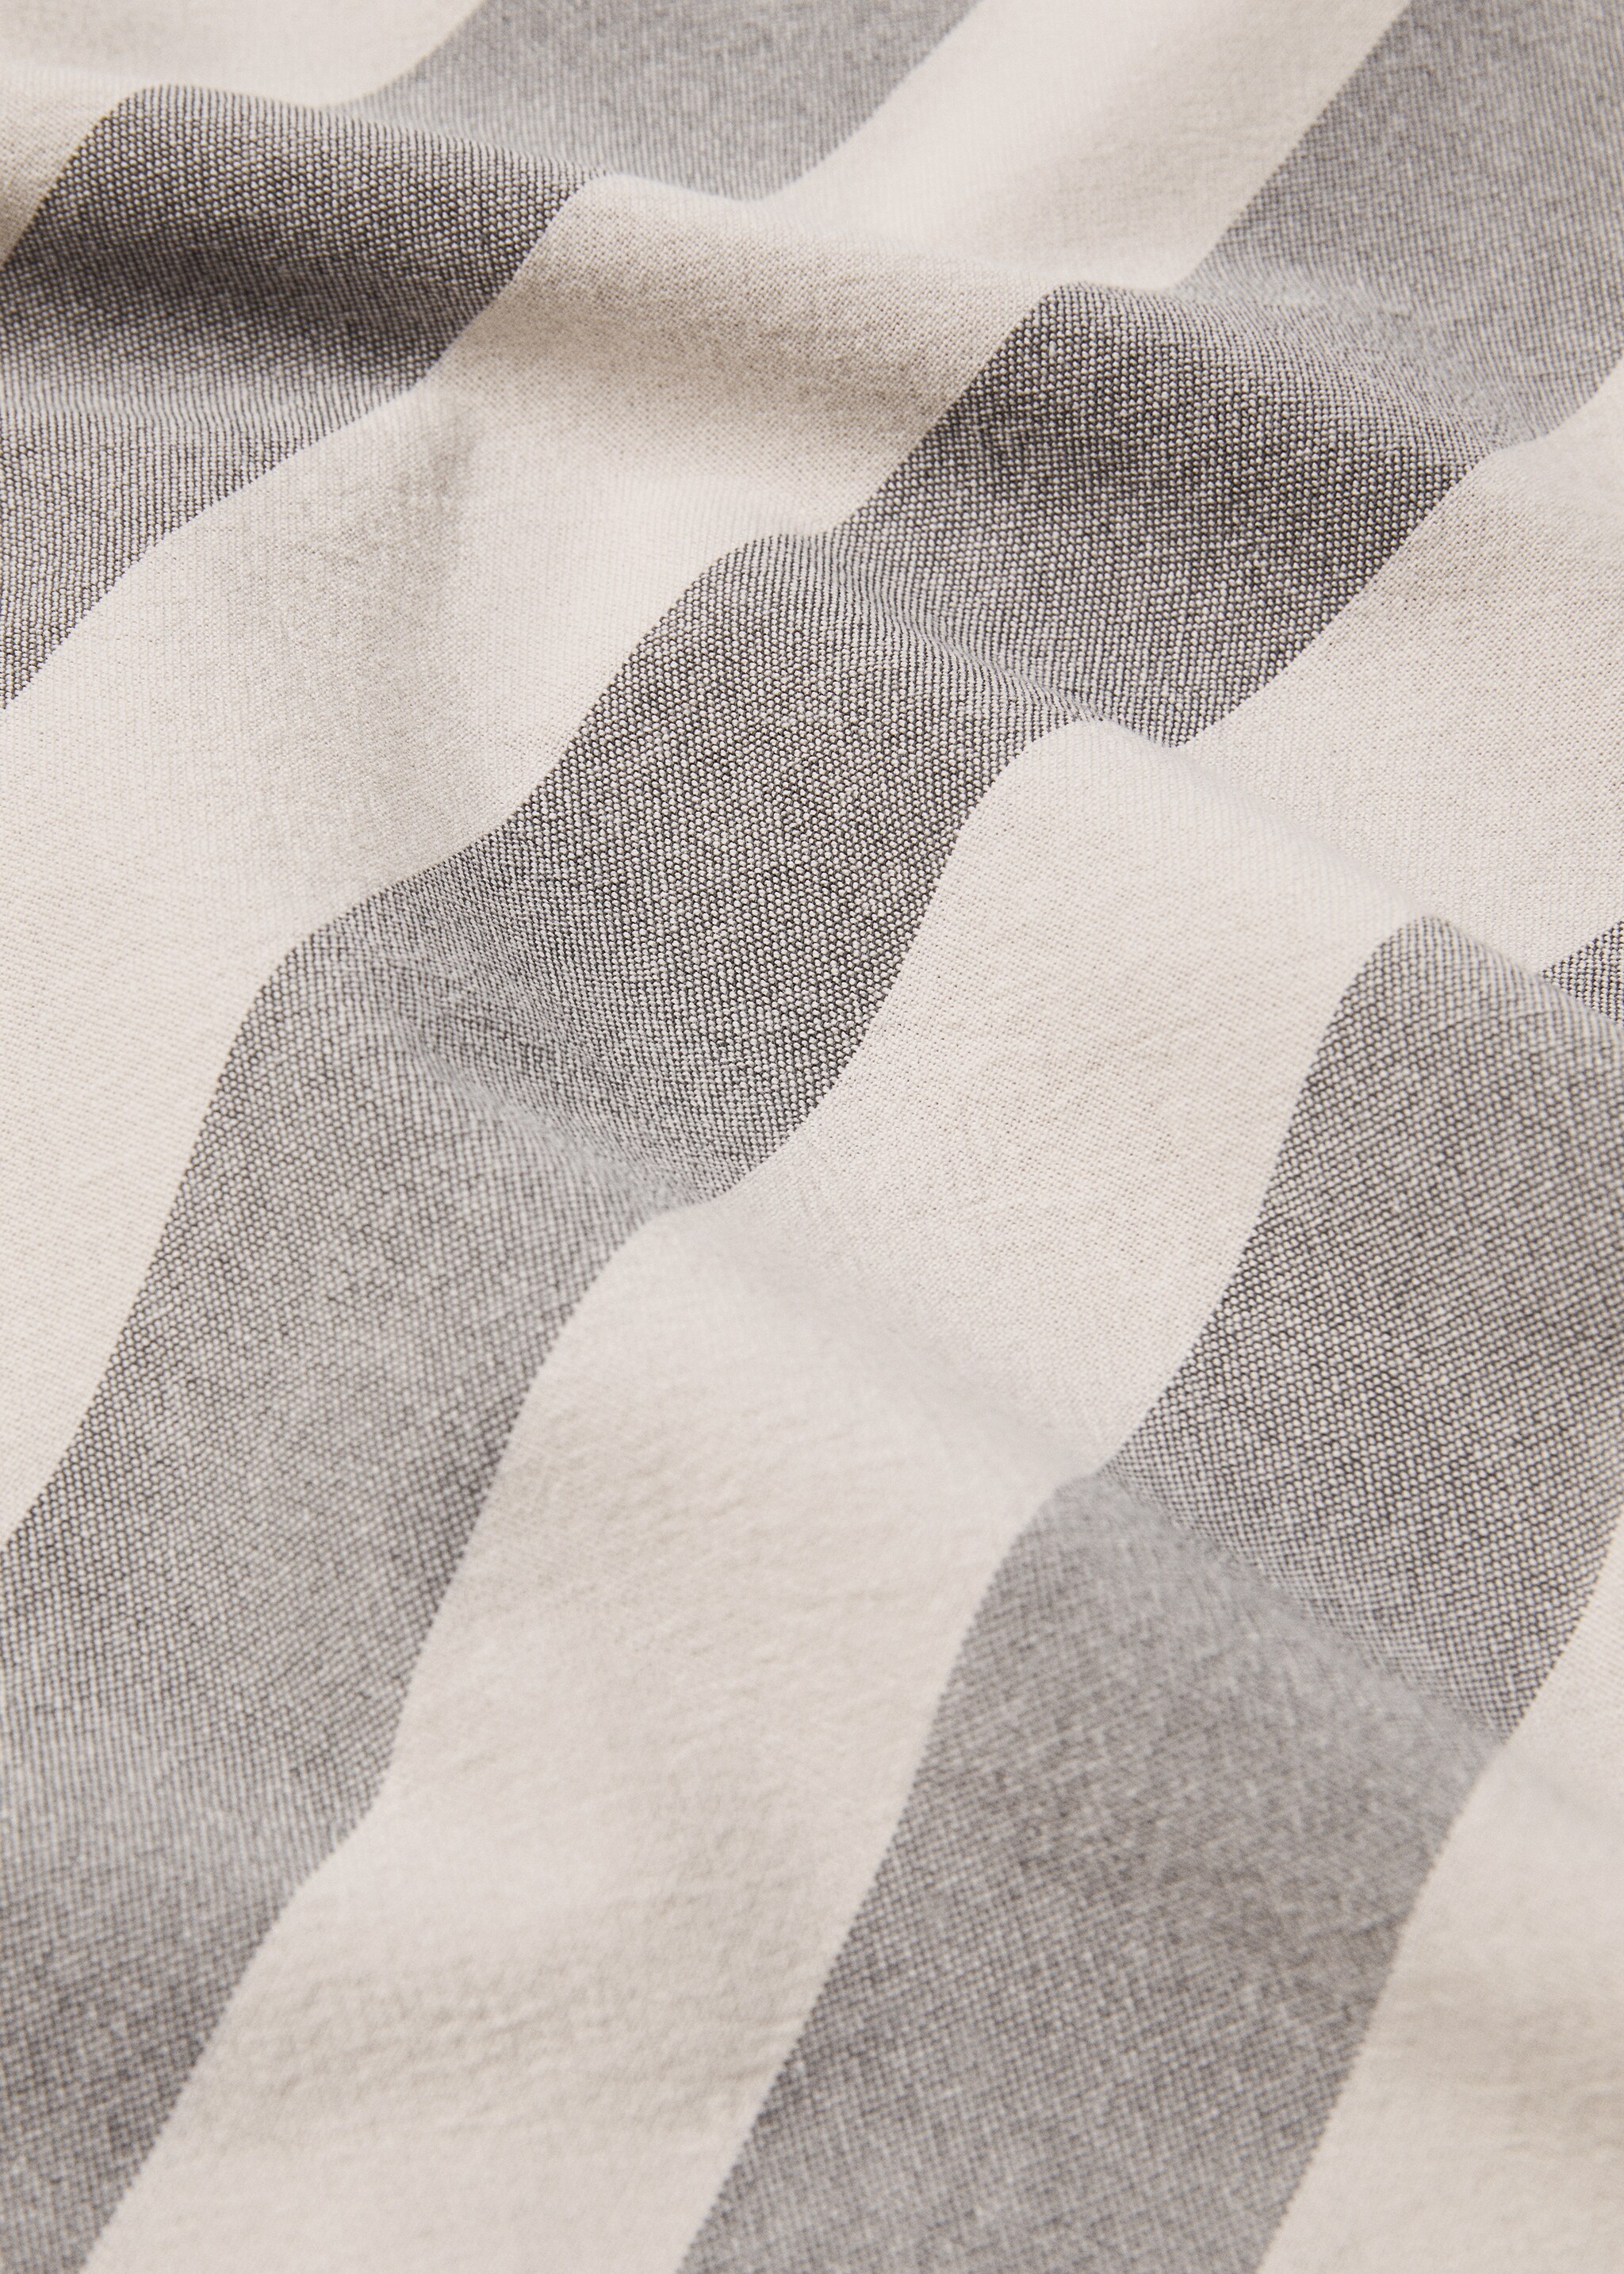 Striped printed beach sarong towel 150x180cm - Details of the article 3